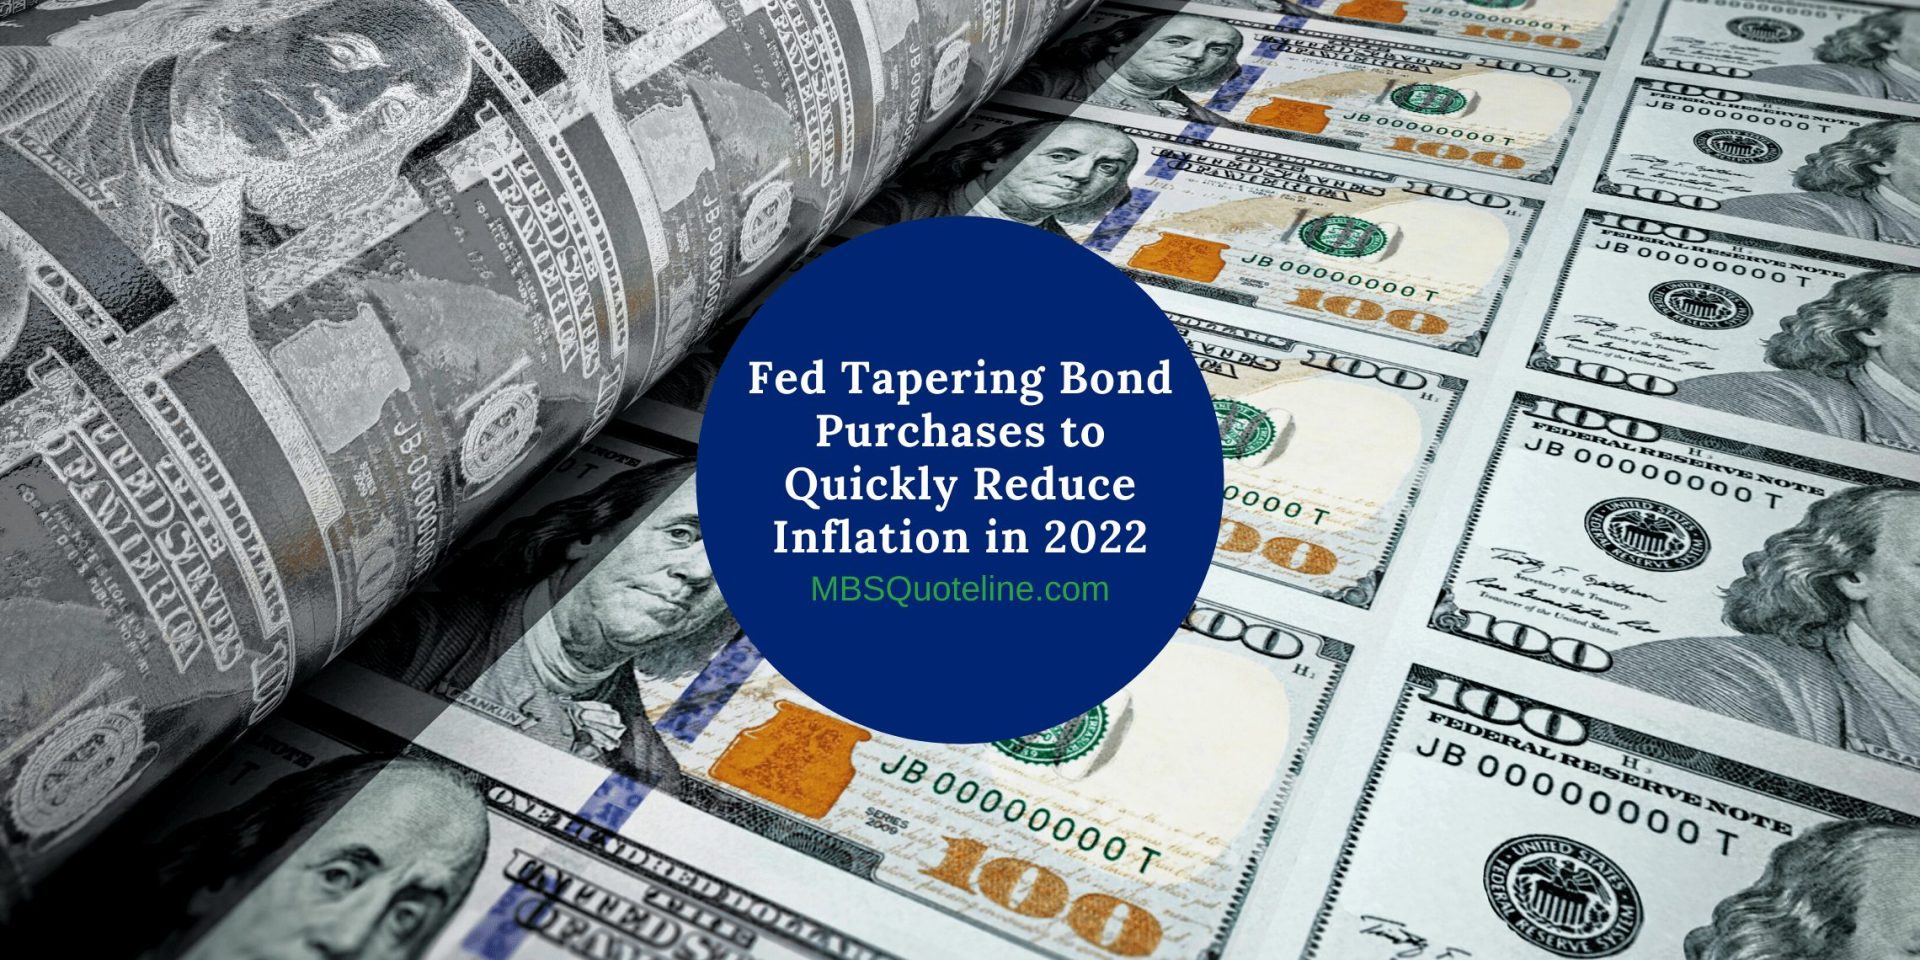 fed tapering bond purchases quickly reduce inflation 2022 mortgagetime mbsquoteline featured